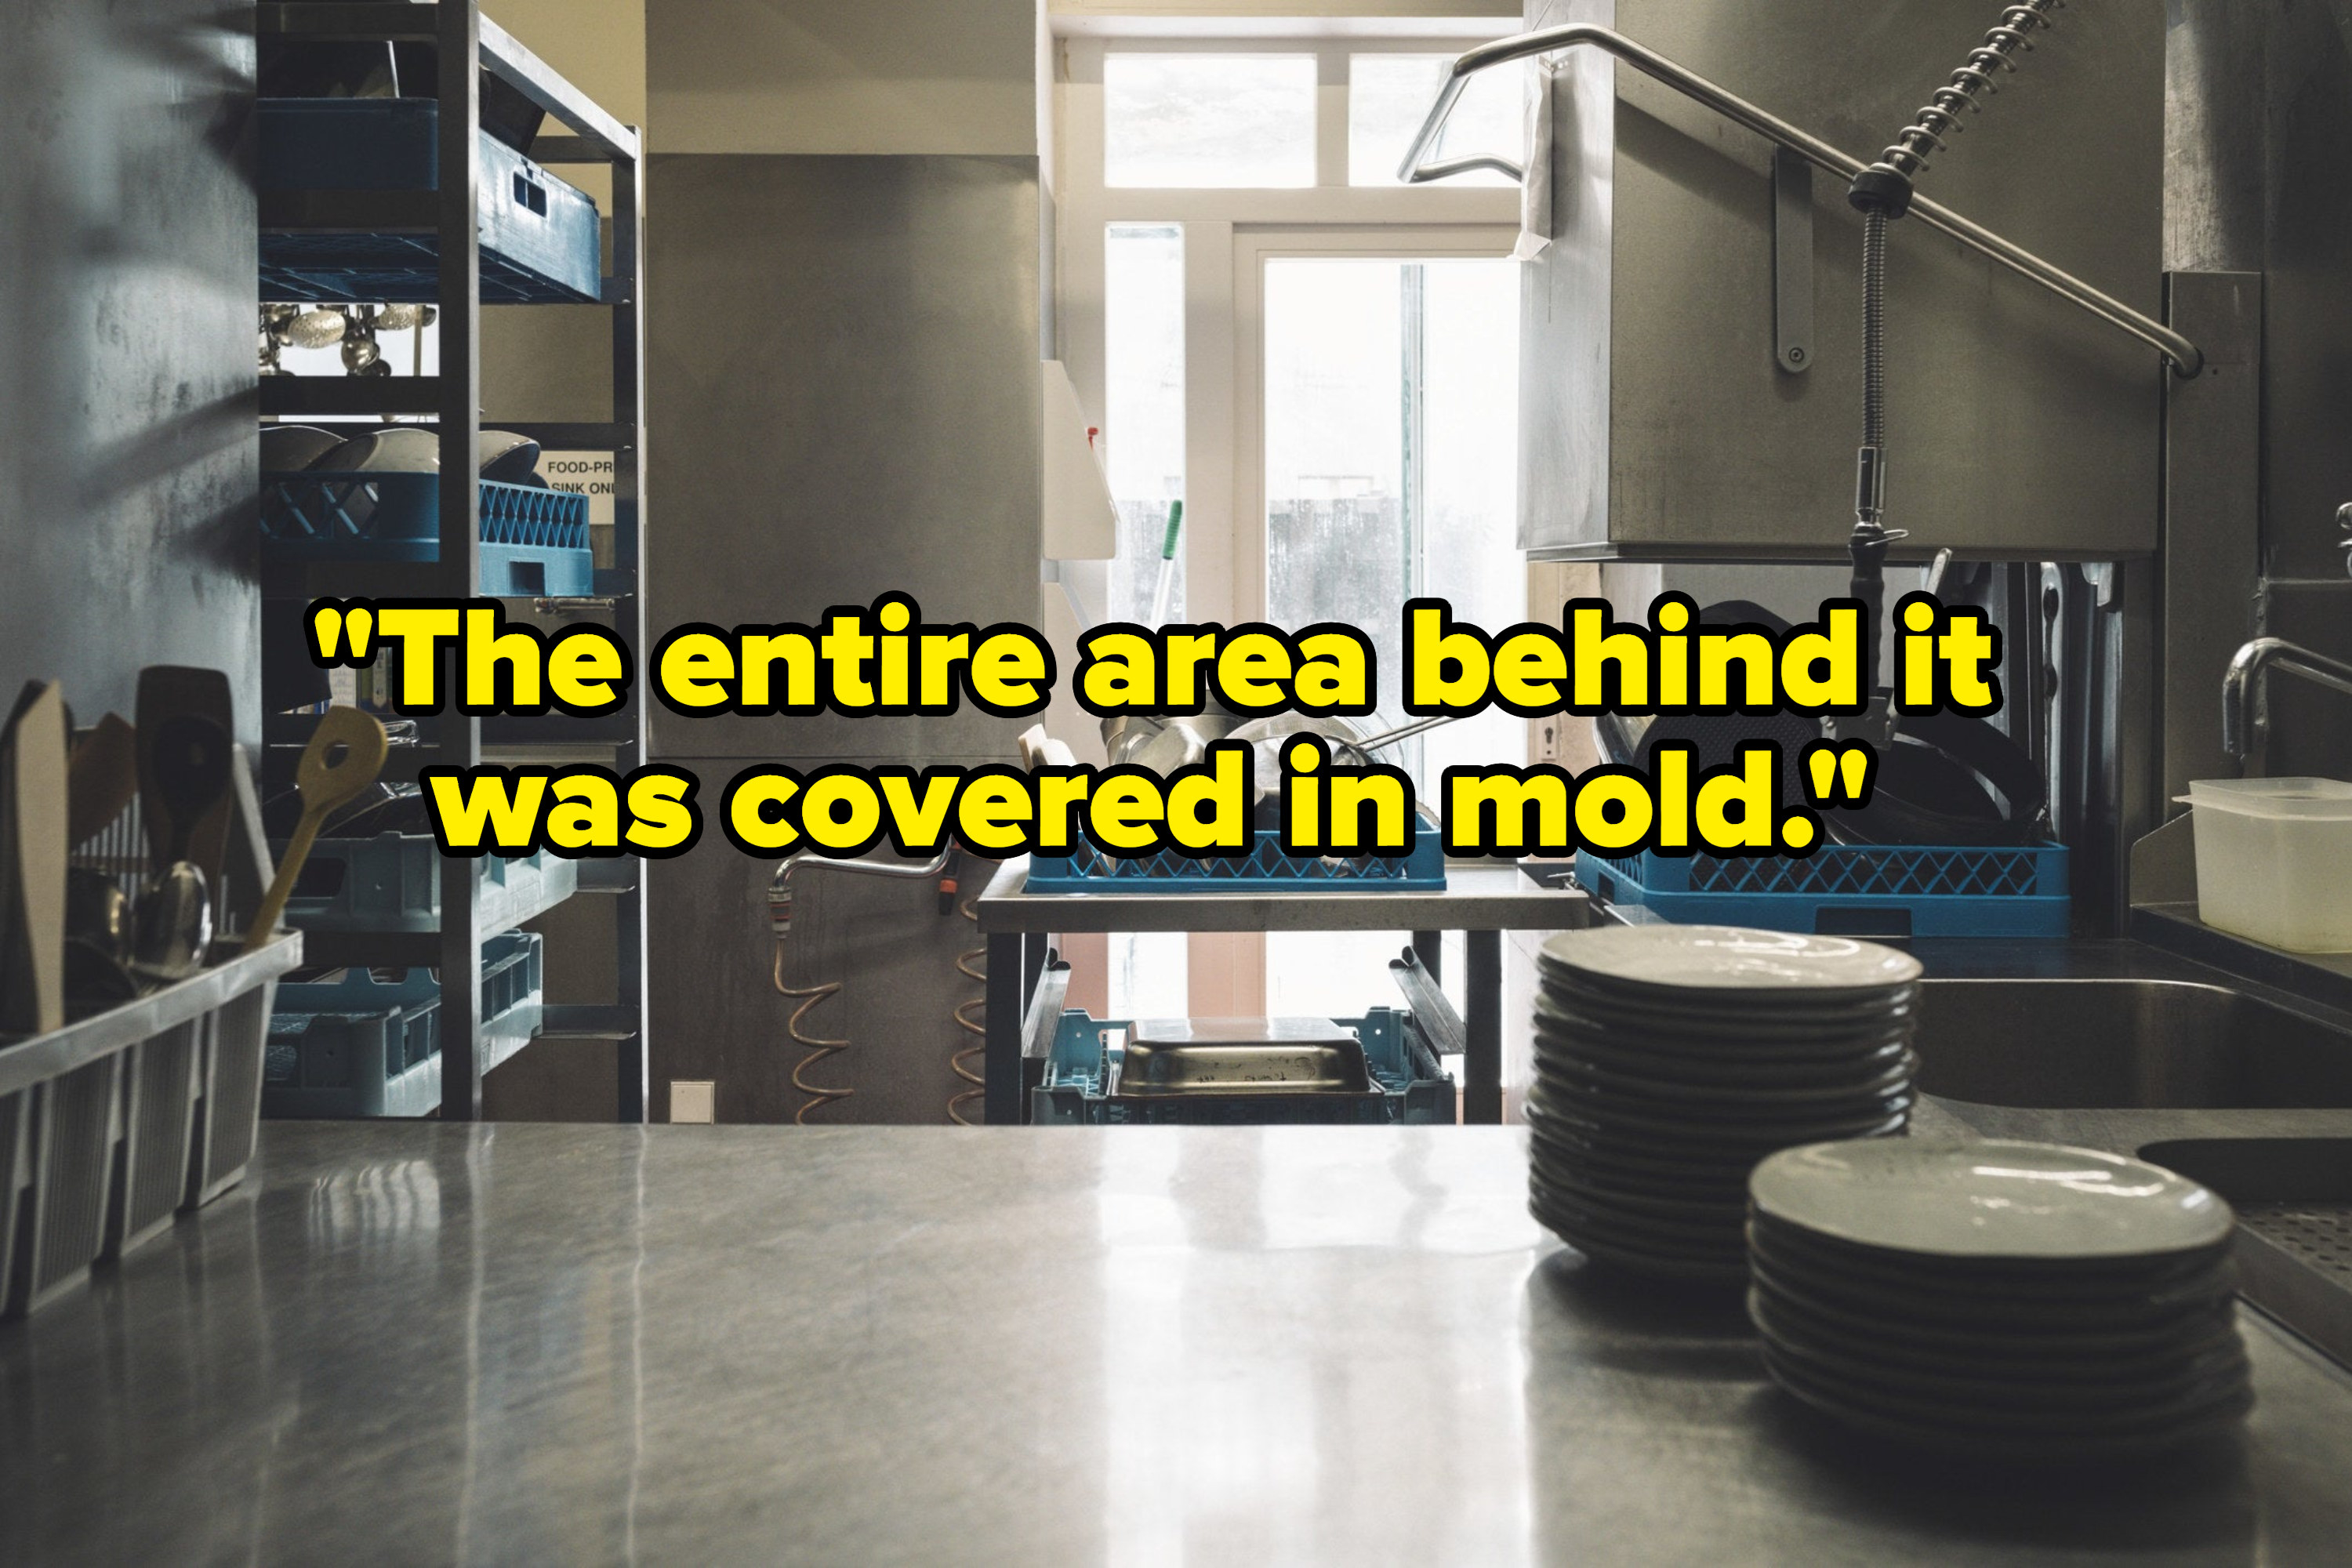 &quot;the entire area behind it was covered in mold&quot; over a kitchen